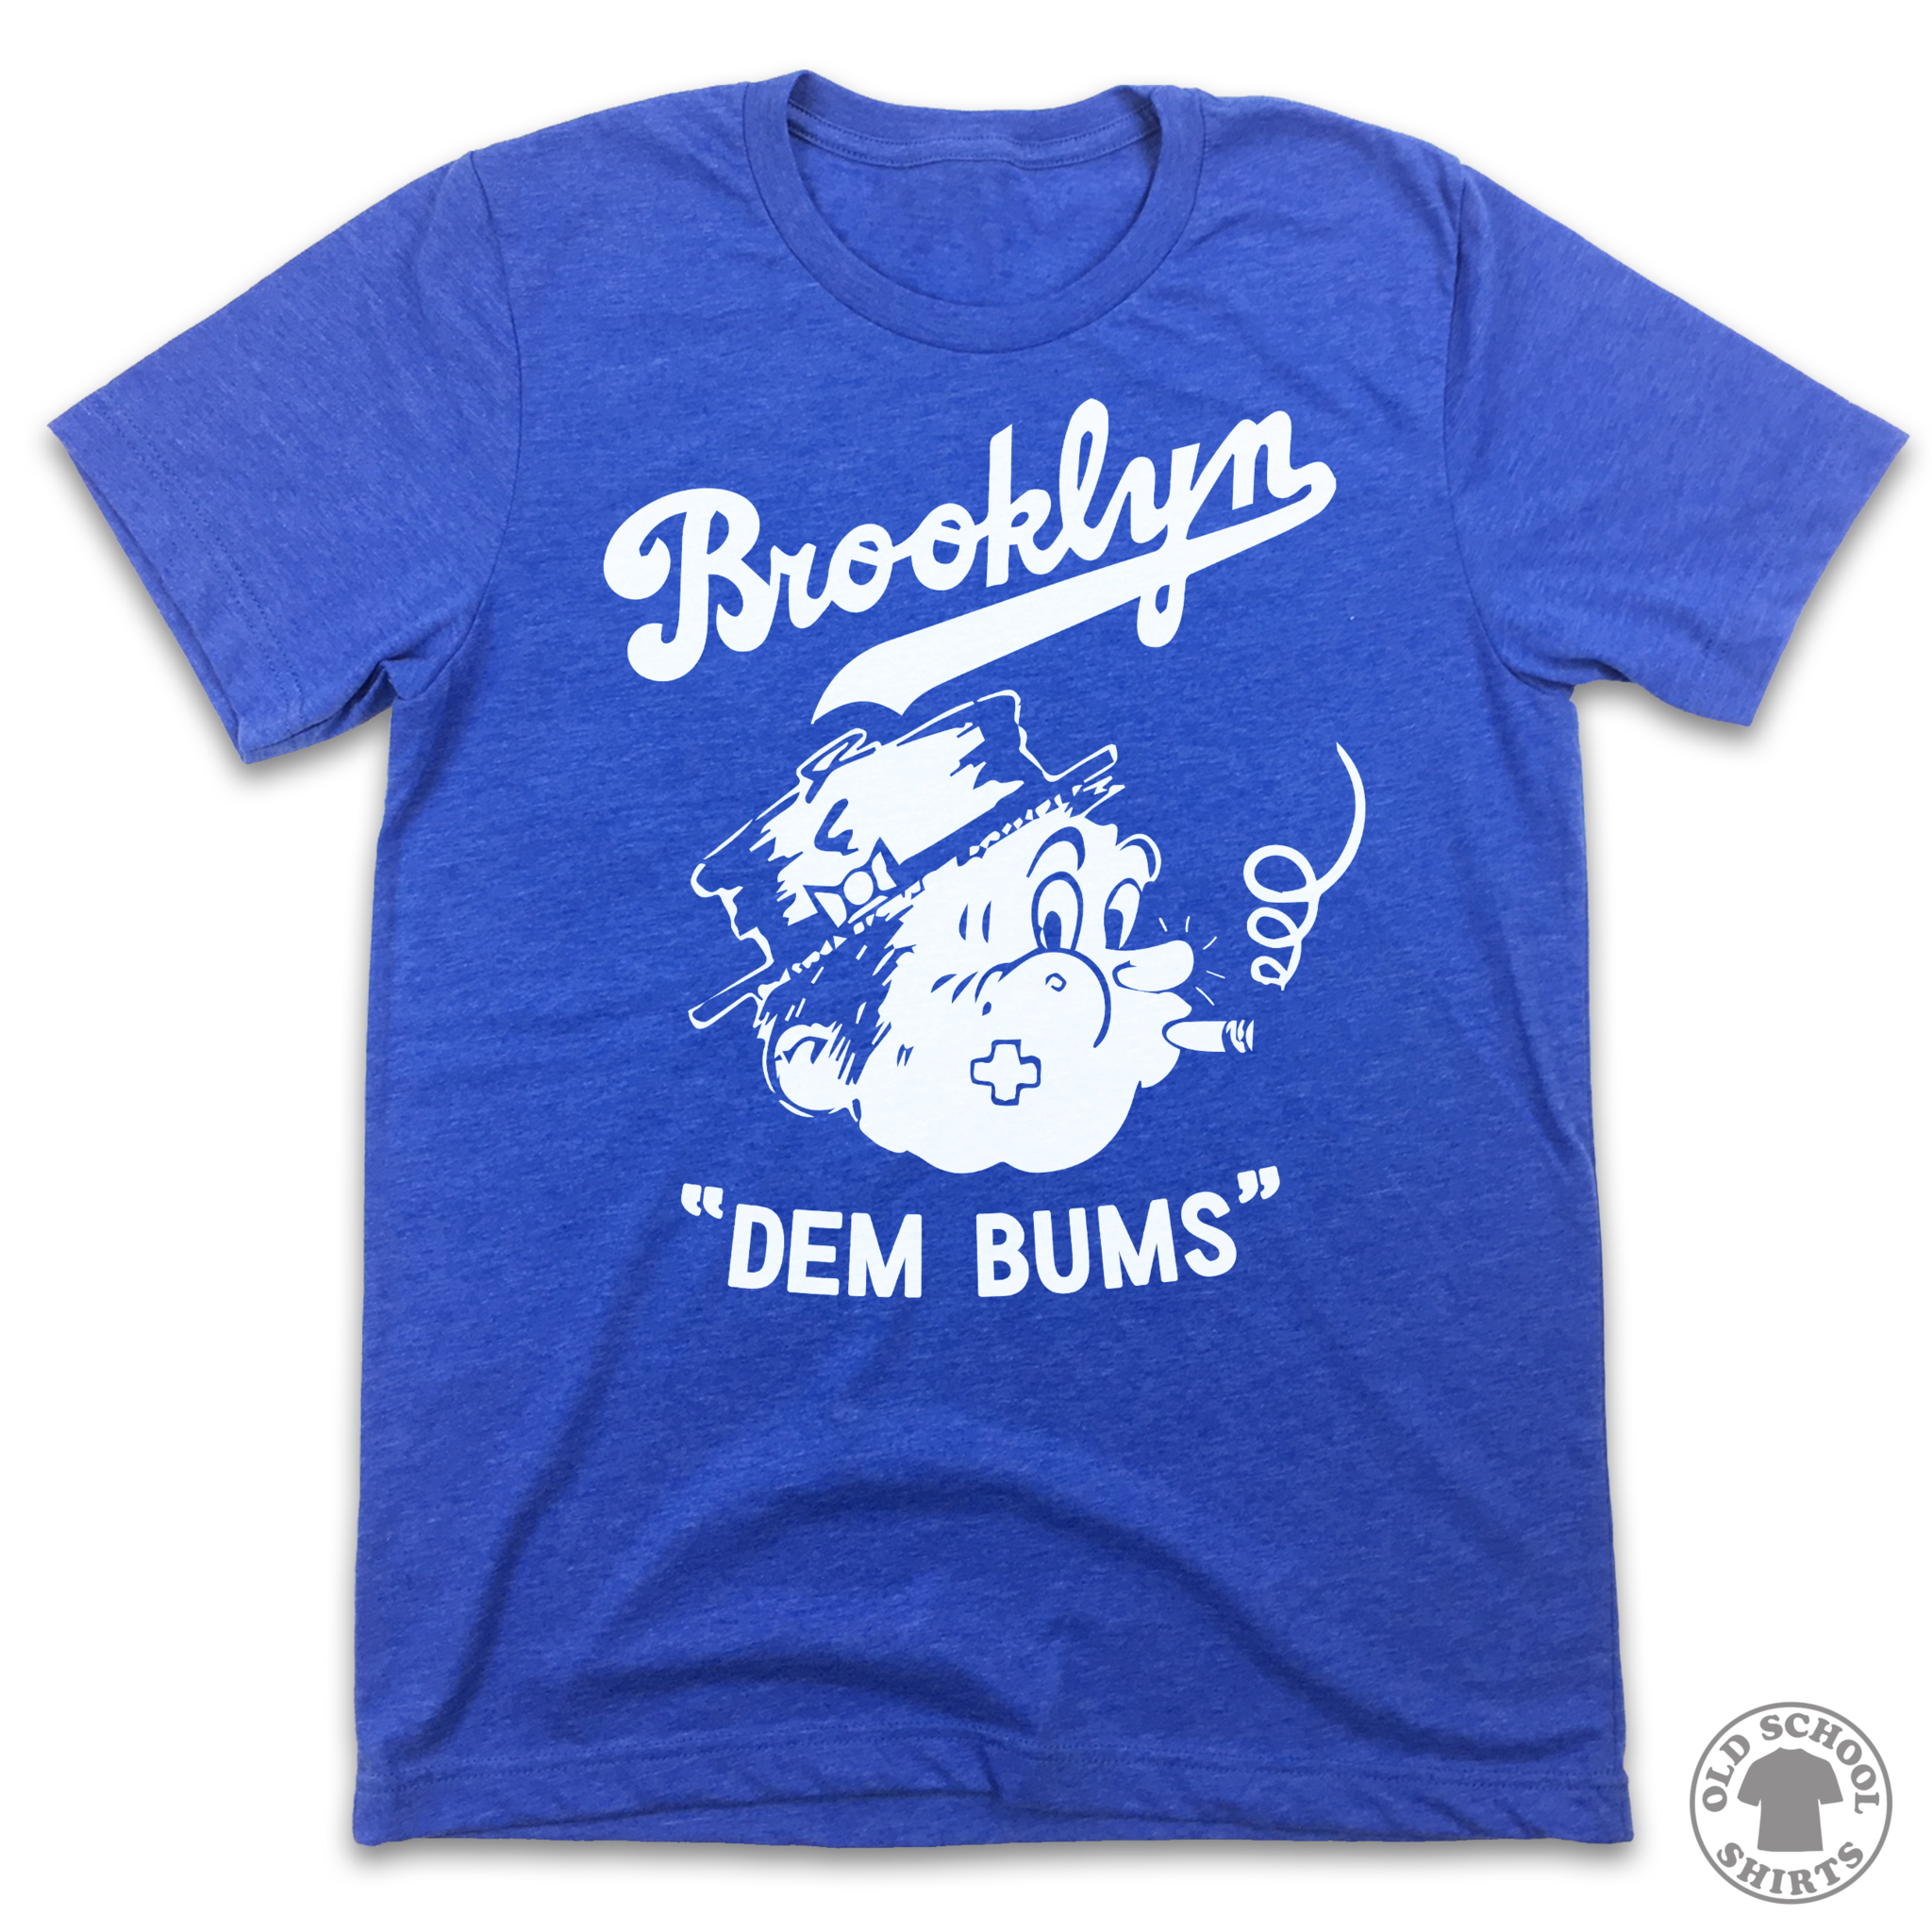 Dem_Bums_updated_tee_web_2048x.png.png